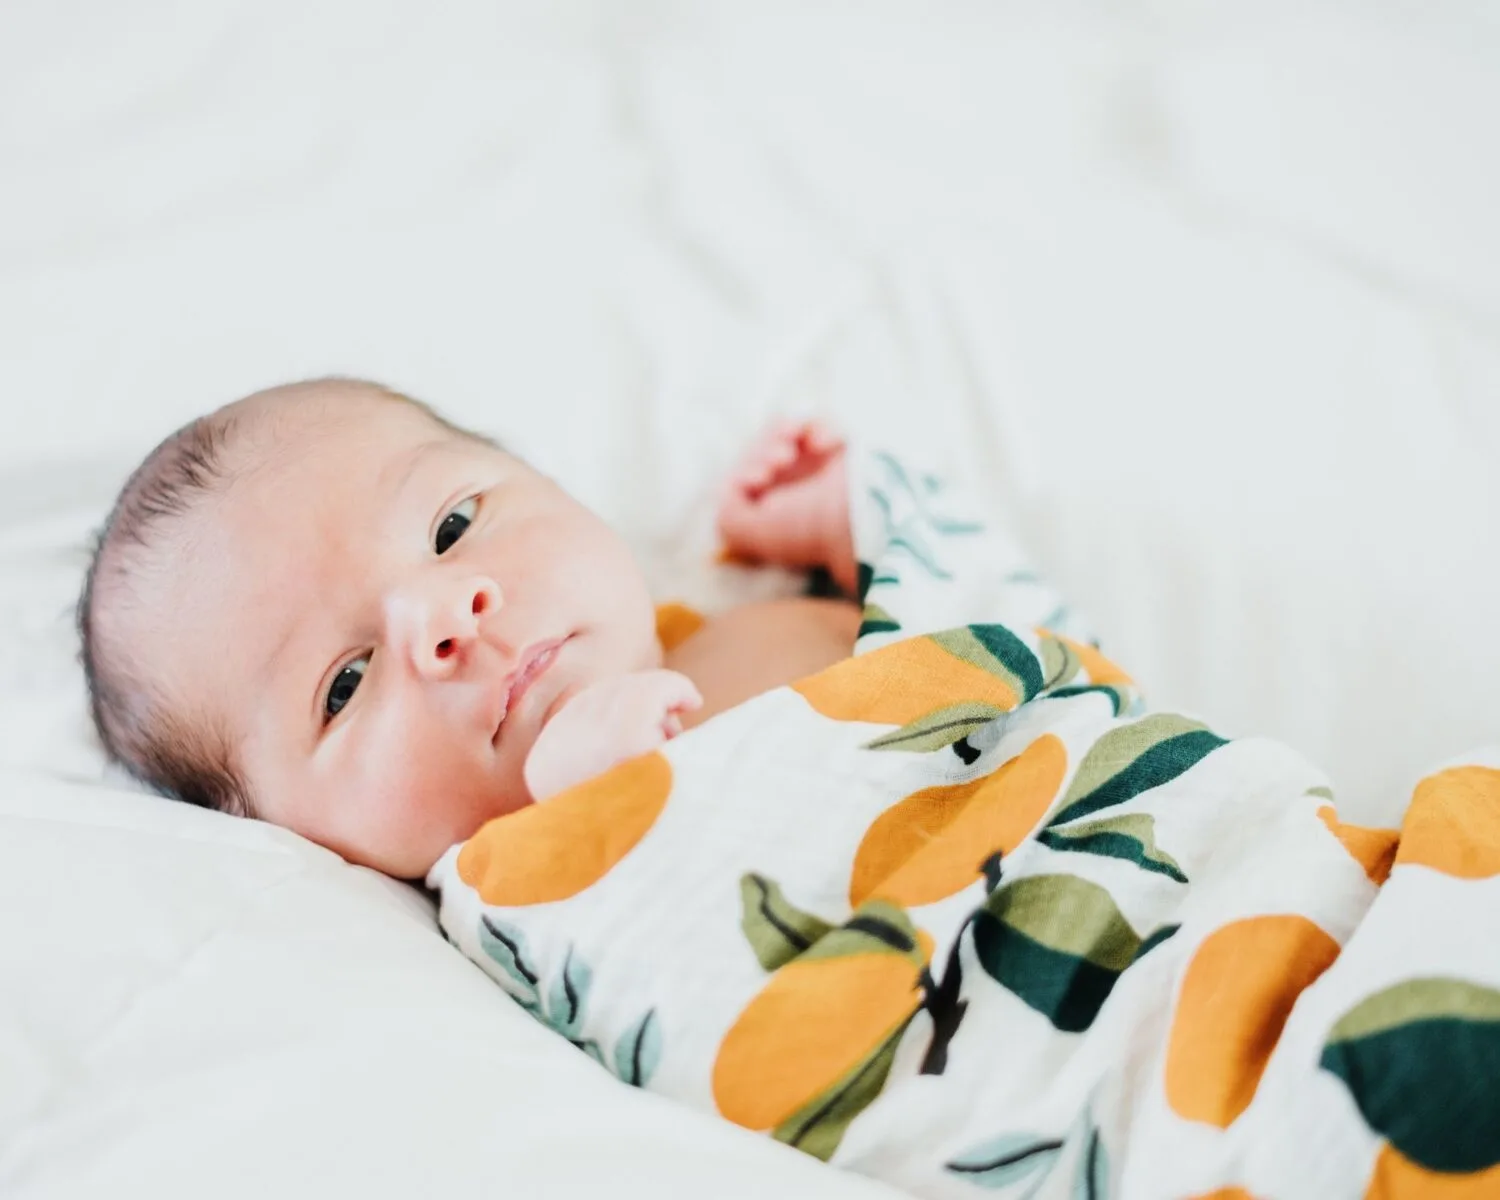 5 Tips If Your Newborn Baby Hates the Swaddle